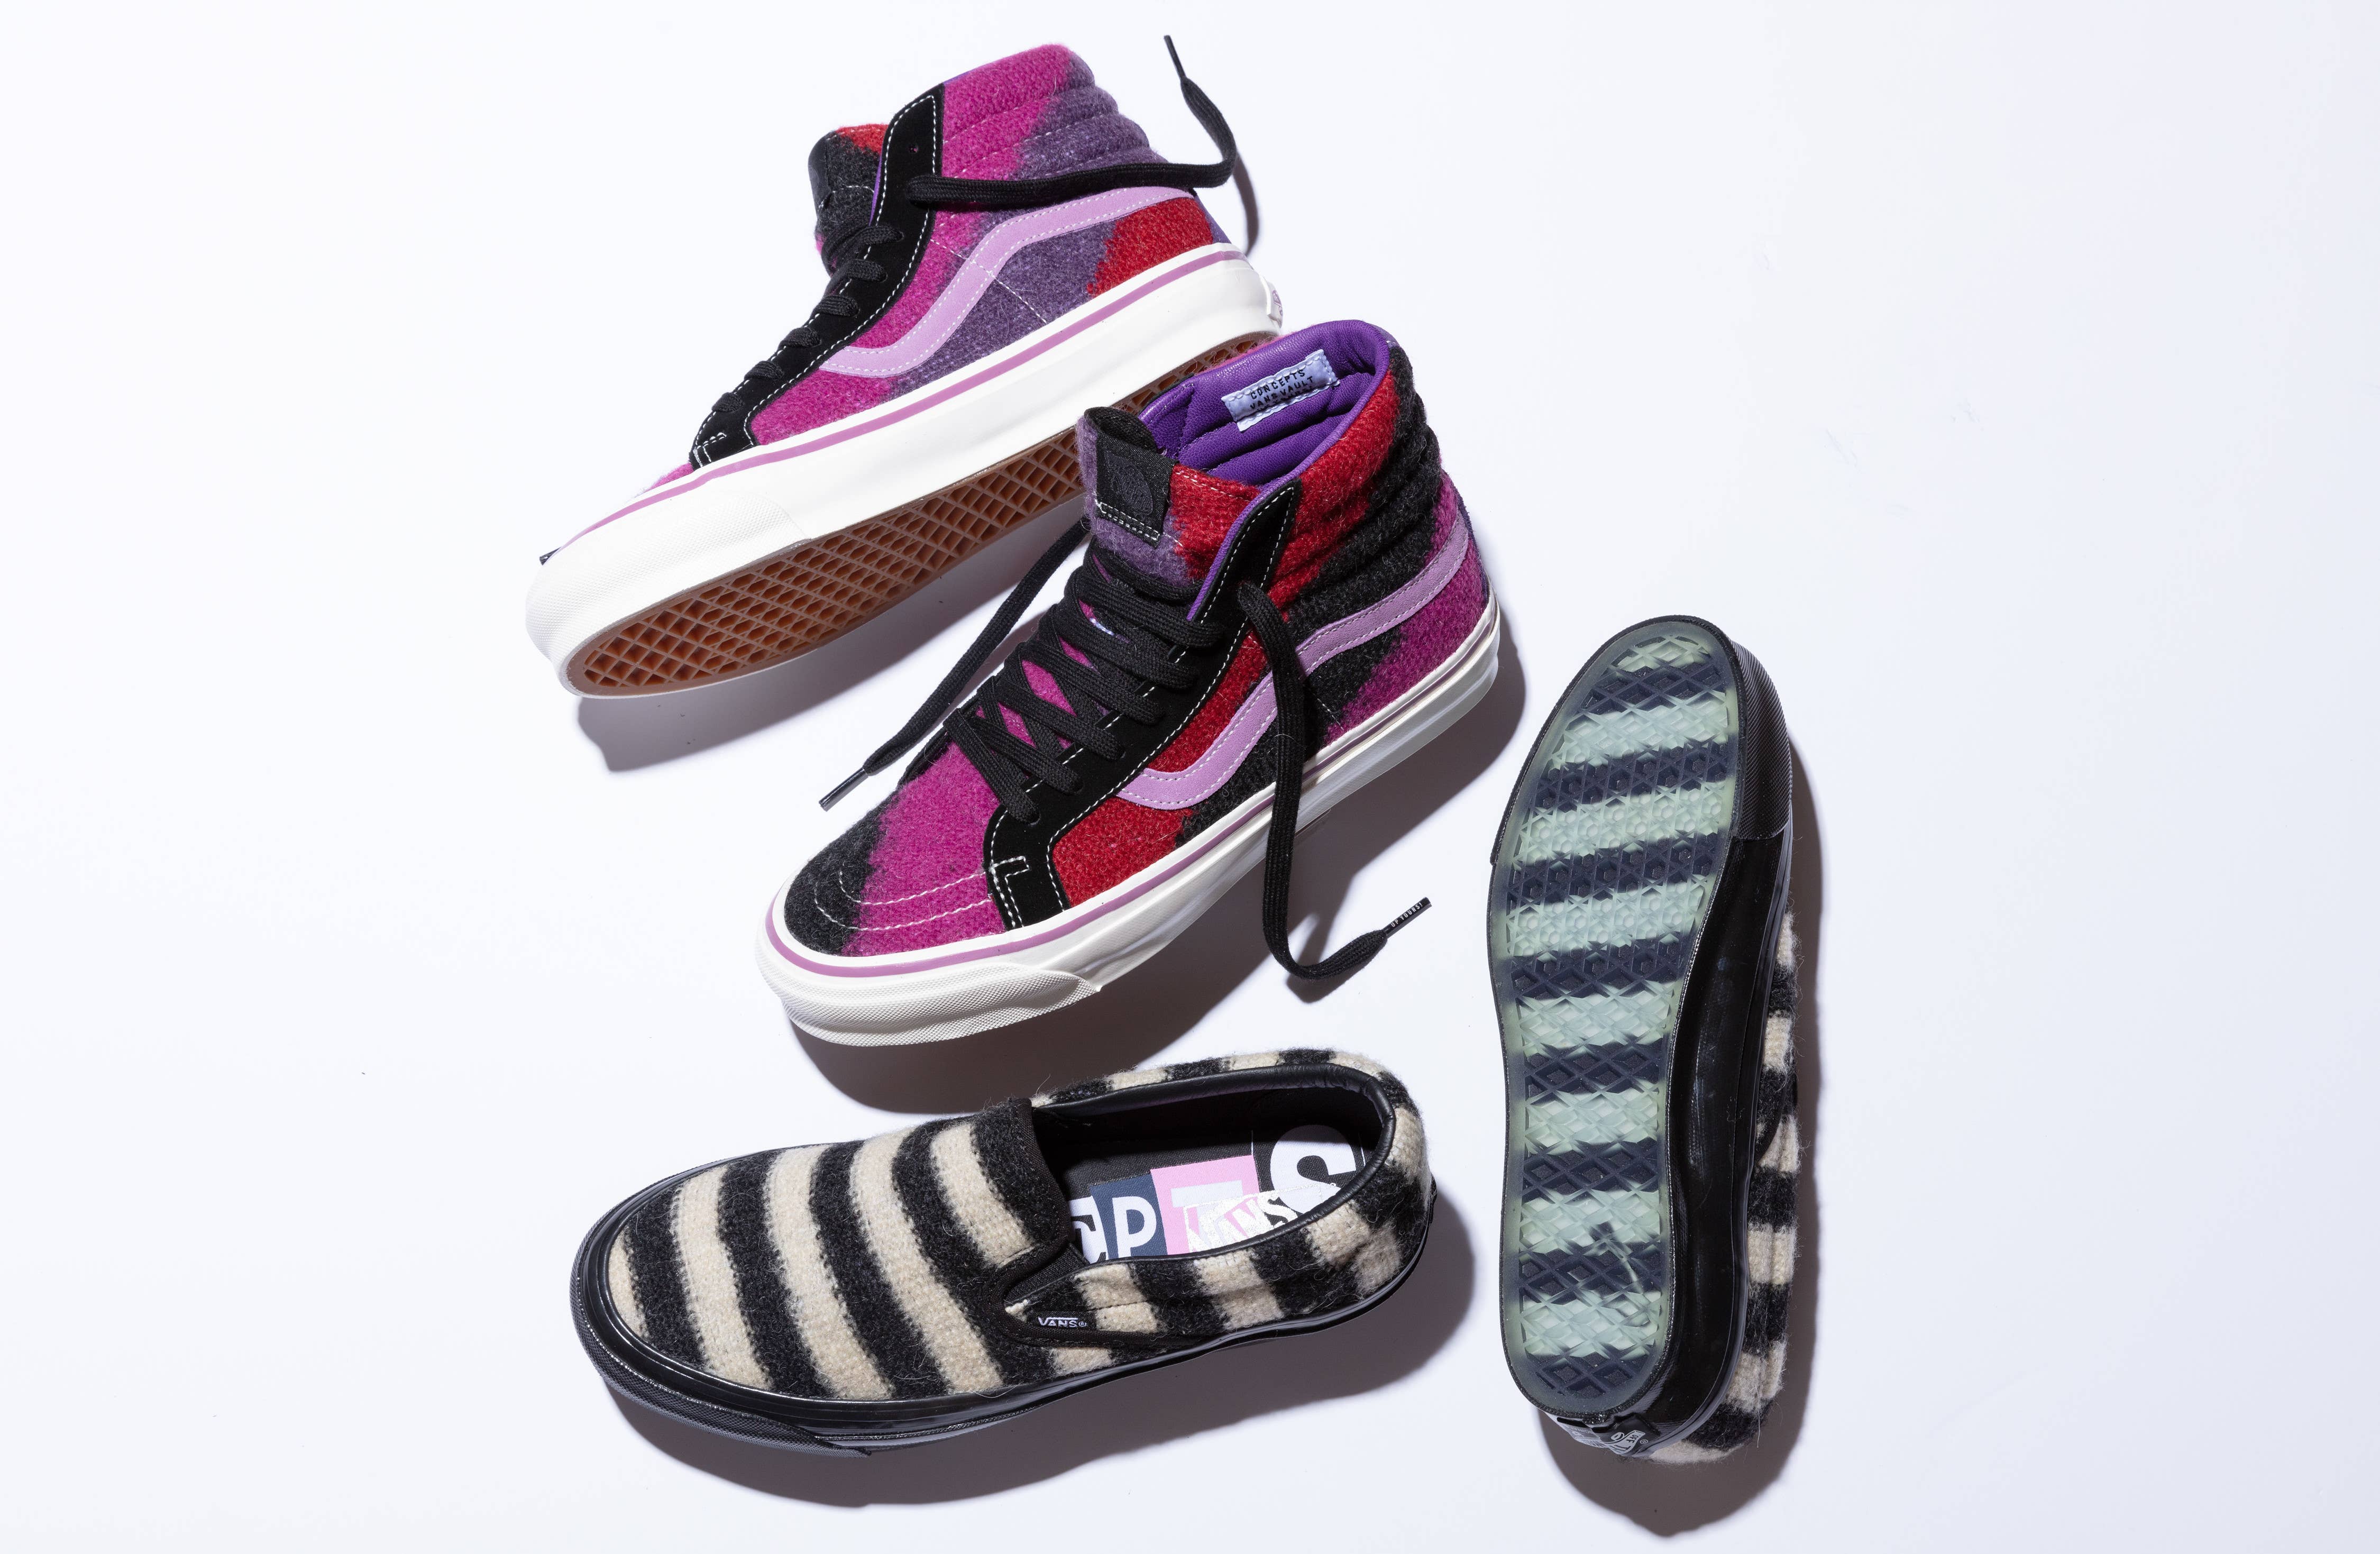 Concepts x Vault by Vans 'Mohair' Collection